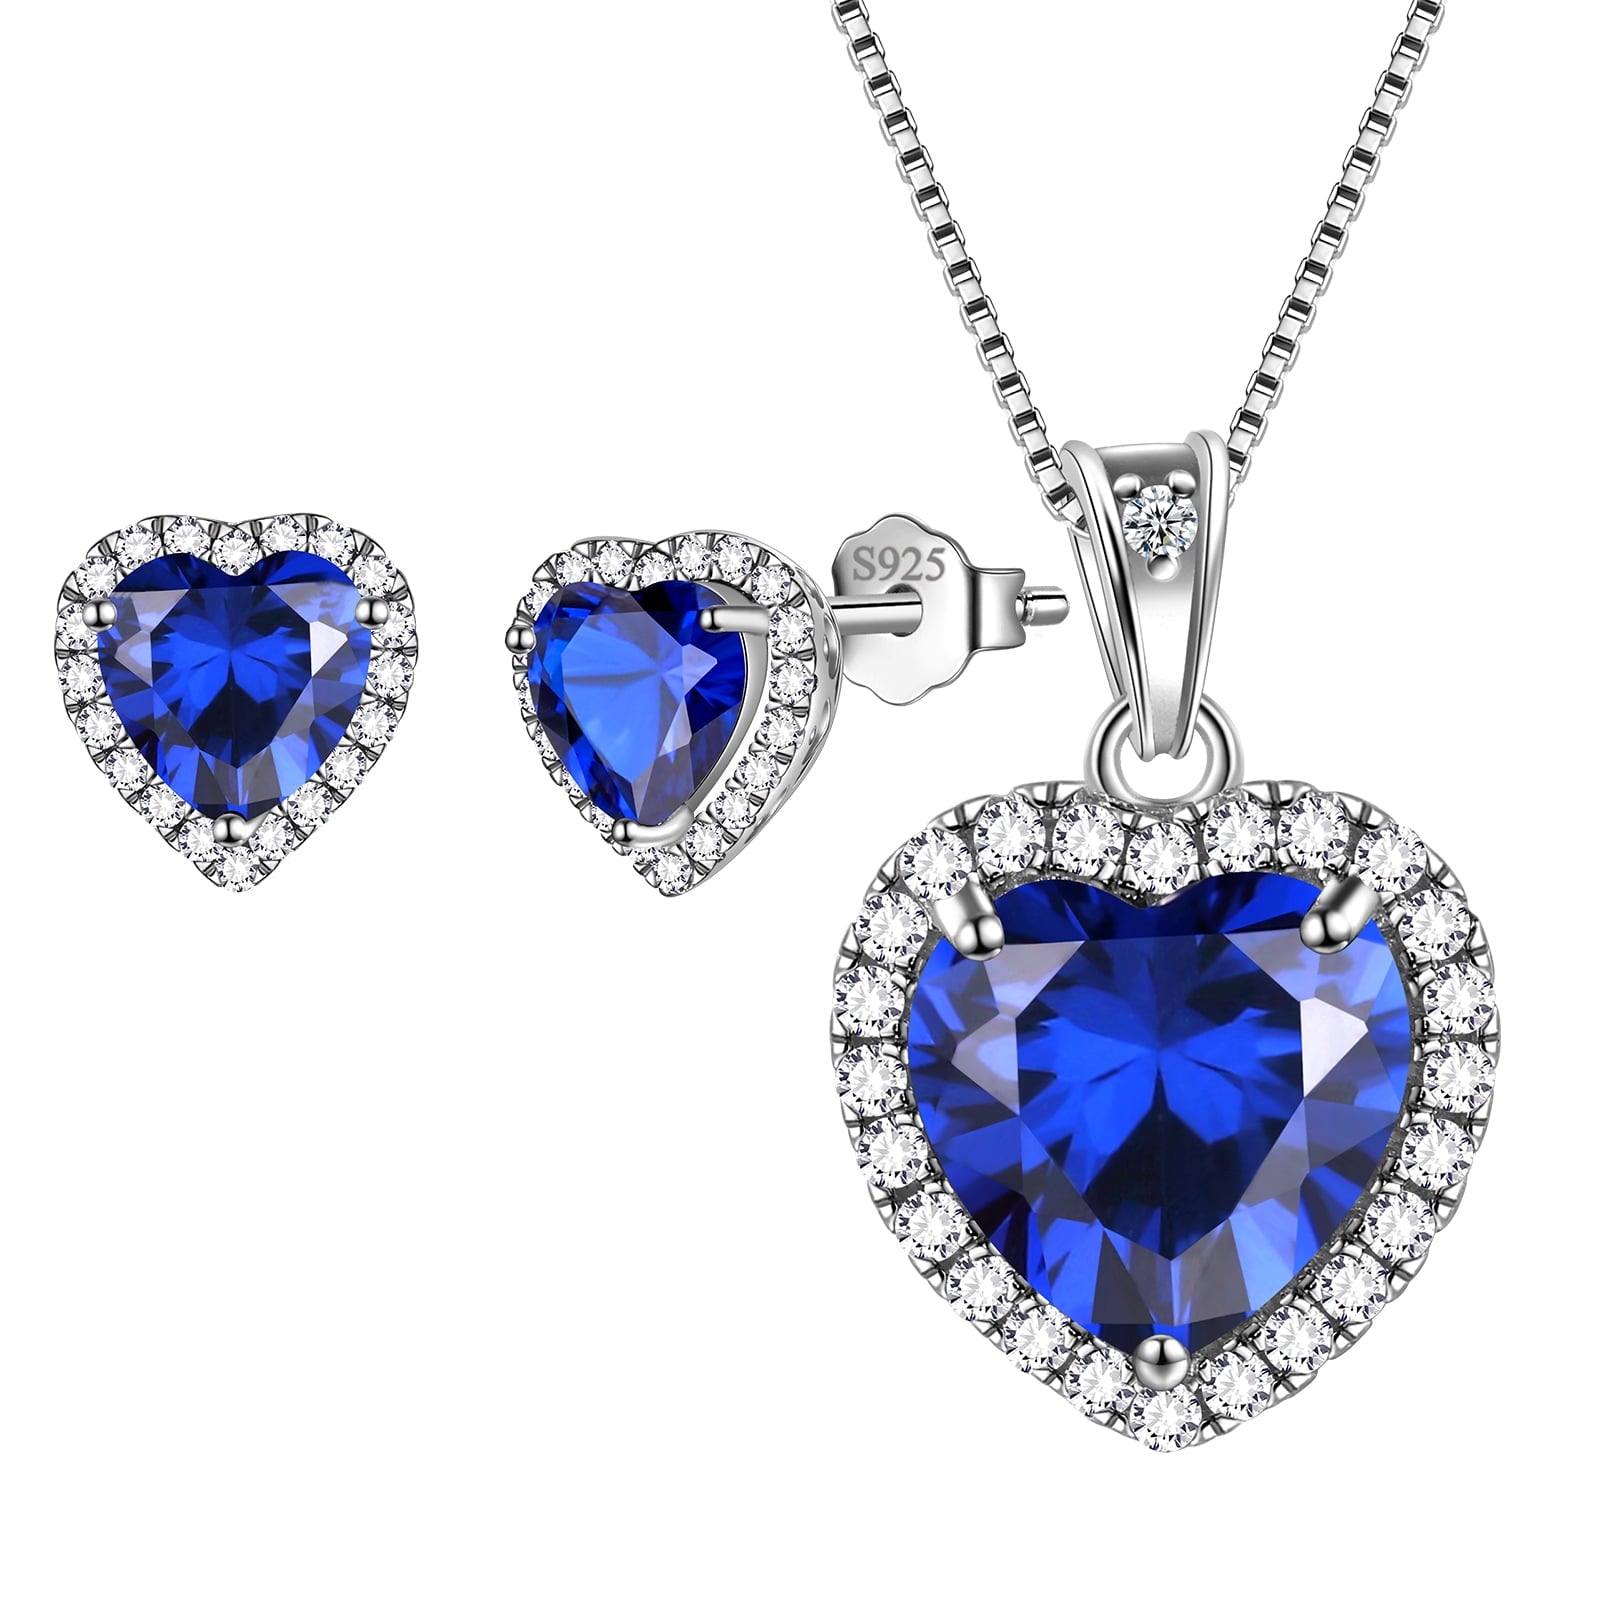 Blue Heart Jewelry Sets for Women, Sapphire September Birthstone Jewelry Set Necklace Earrings 925 Sterling Silver Jewelry Girls Birthday Valentine's Day Gifts